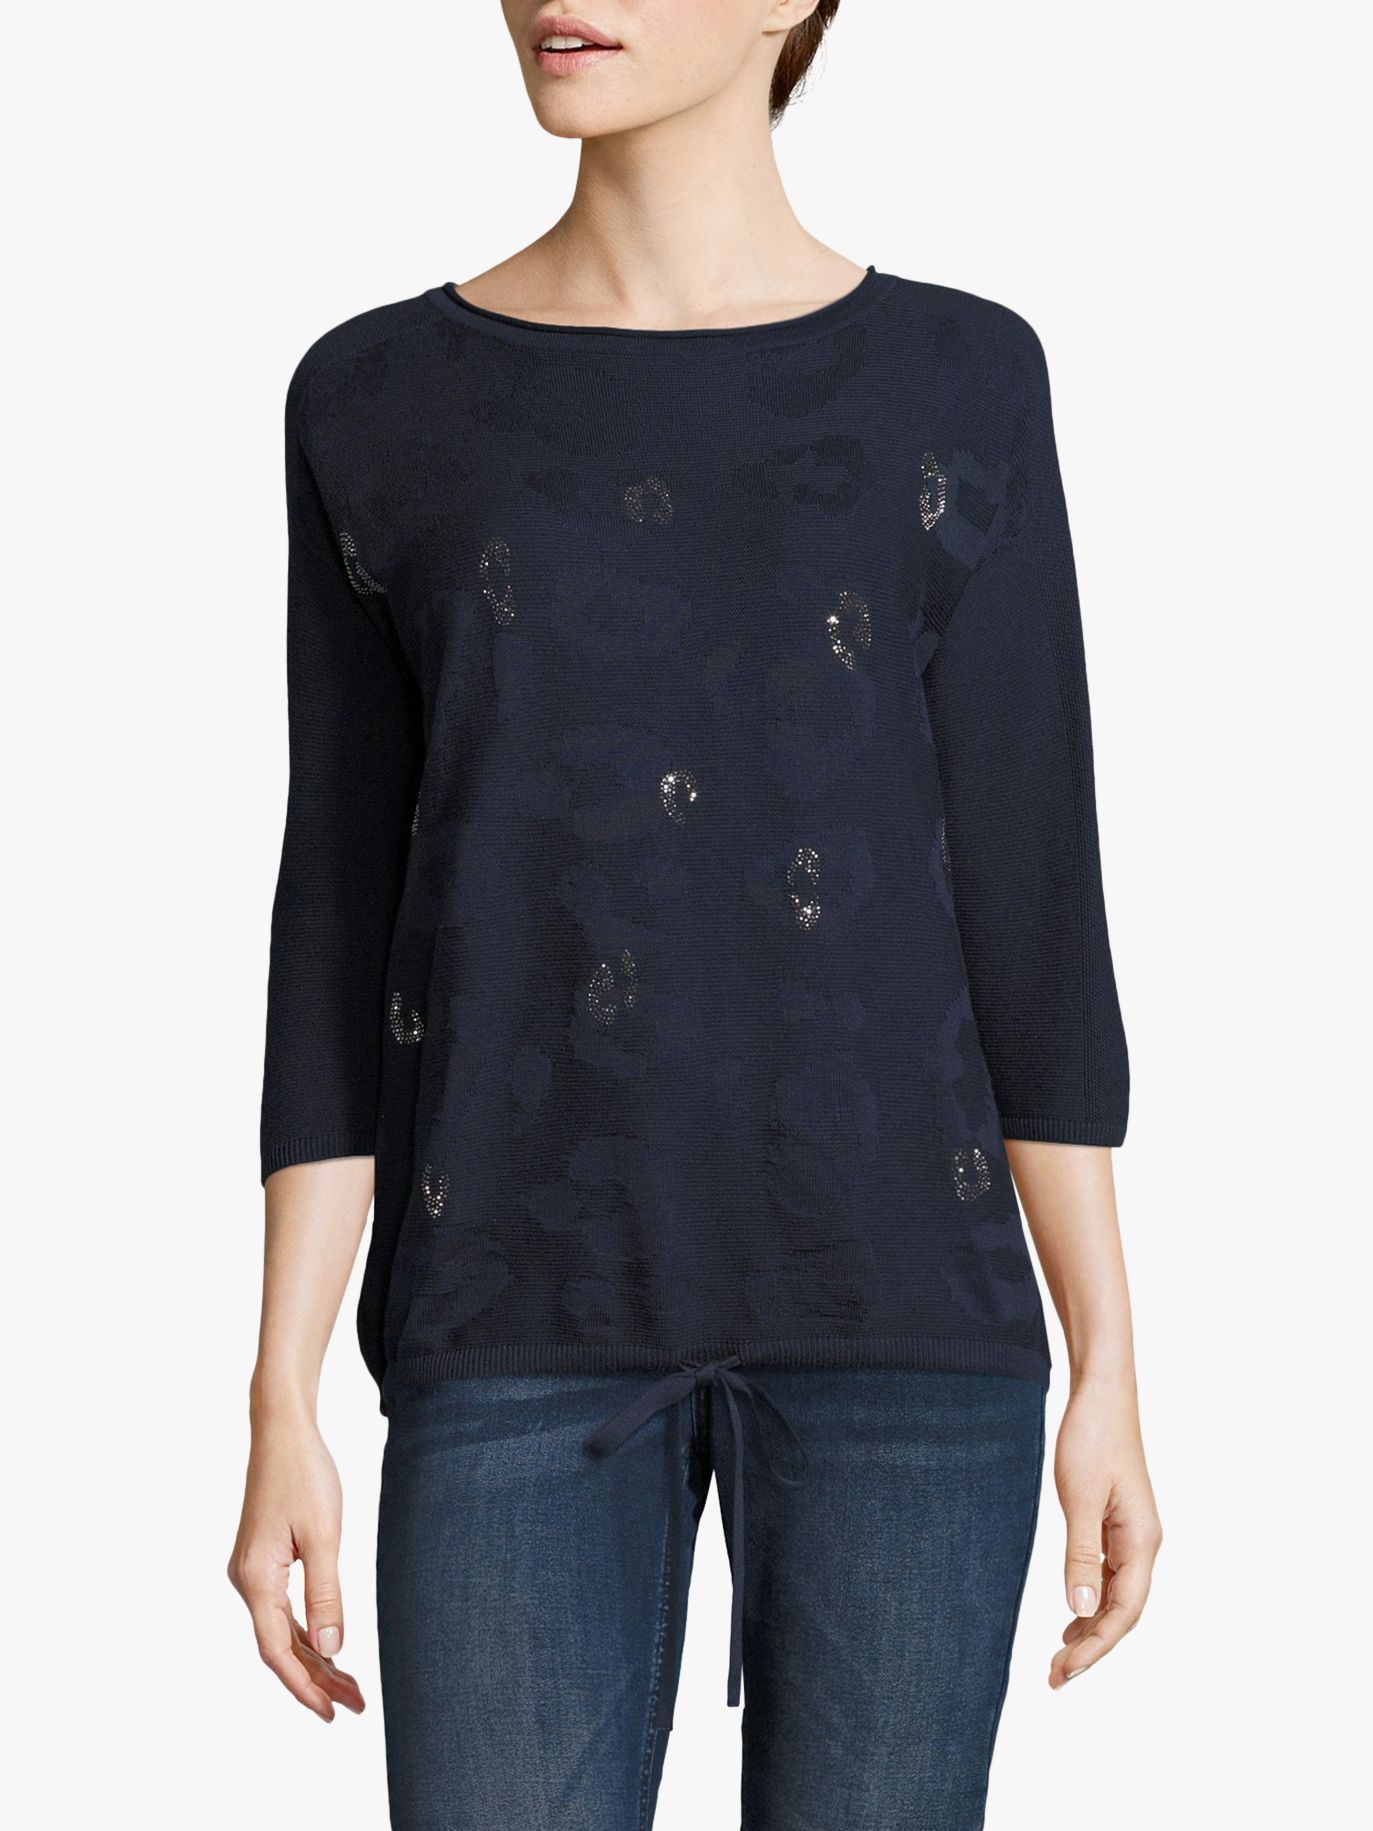 Betty Barclay Embellished Textured Top